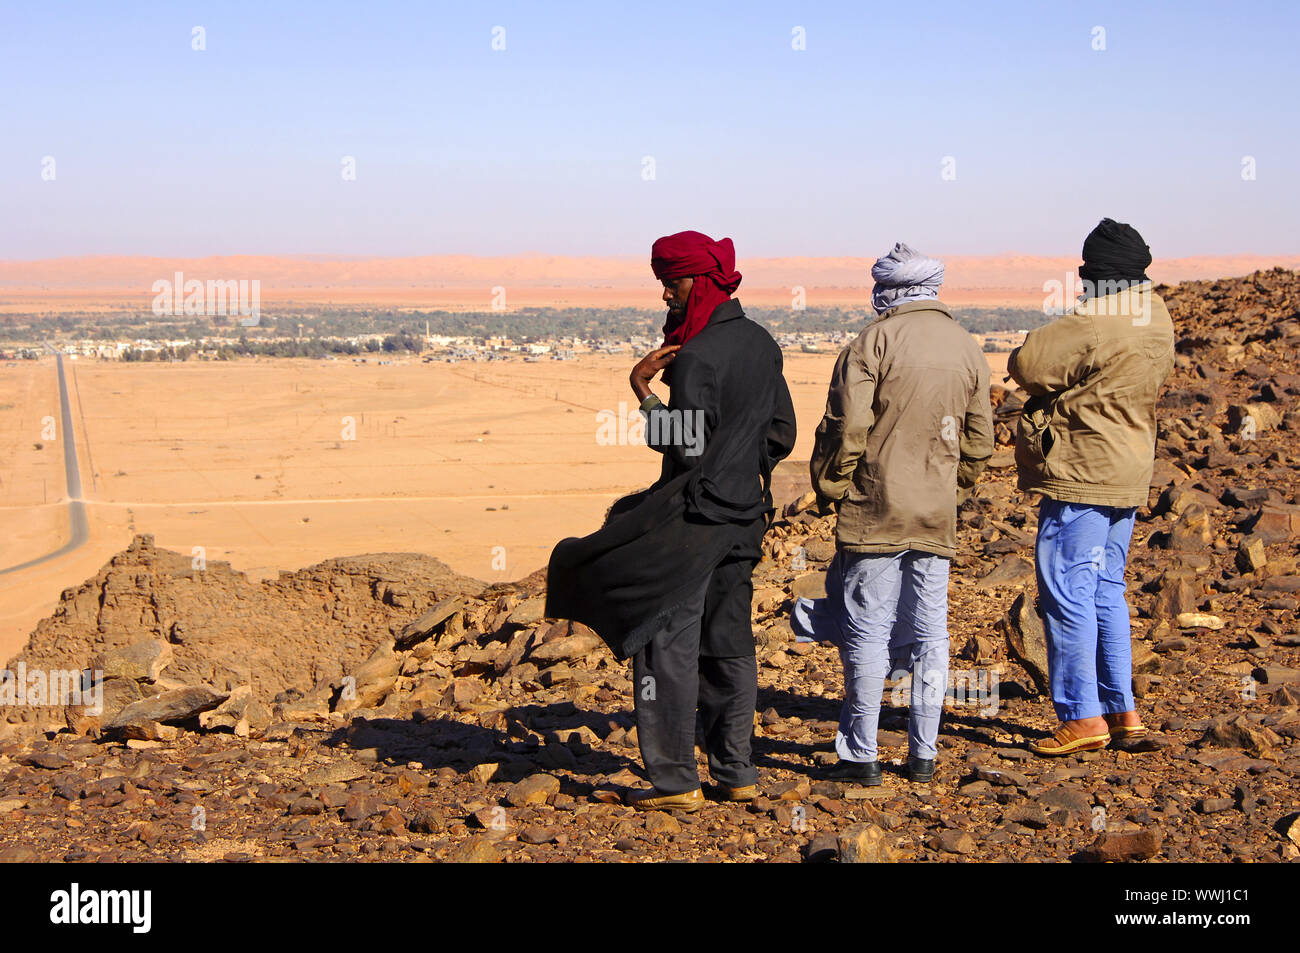 Native men in Arabic dress with traditional headscarf looking from a hill to the desert town of Germa in the plain Stock Photo